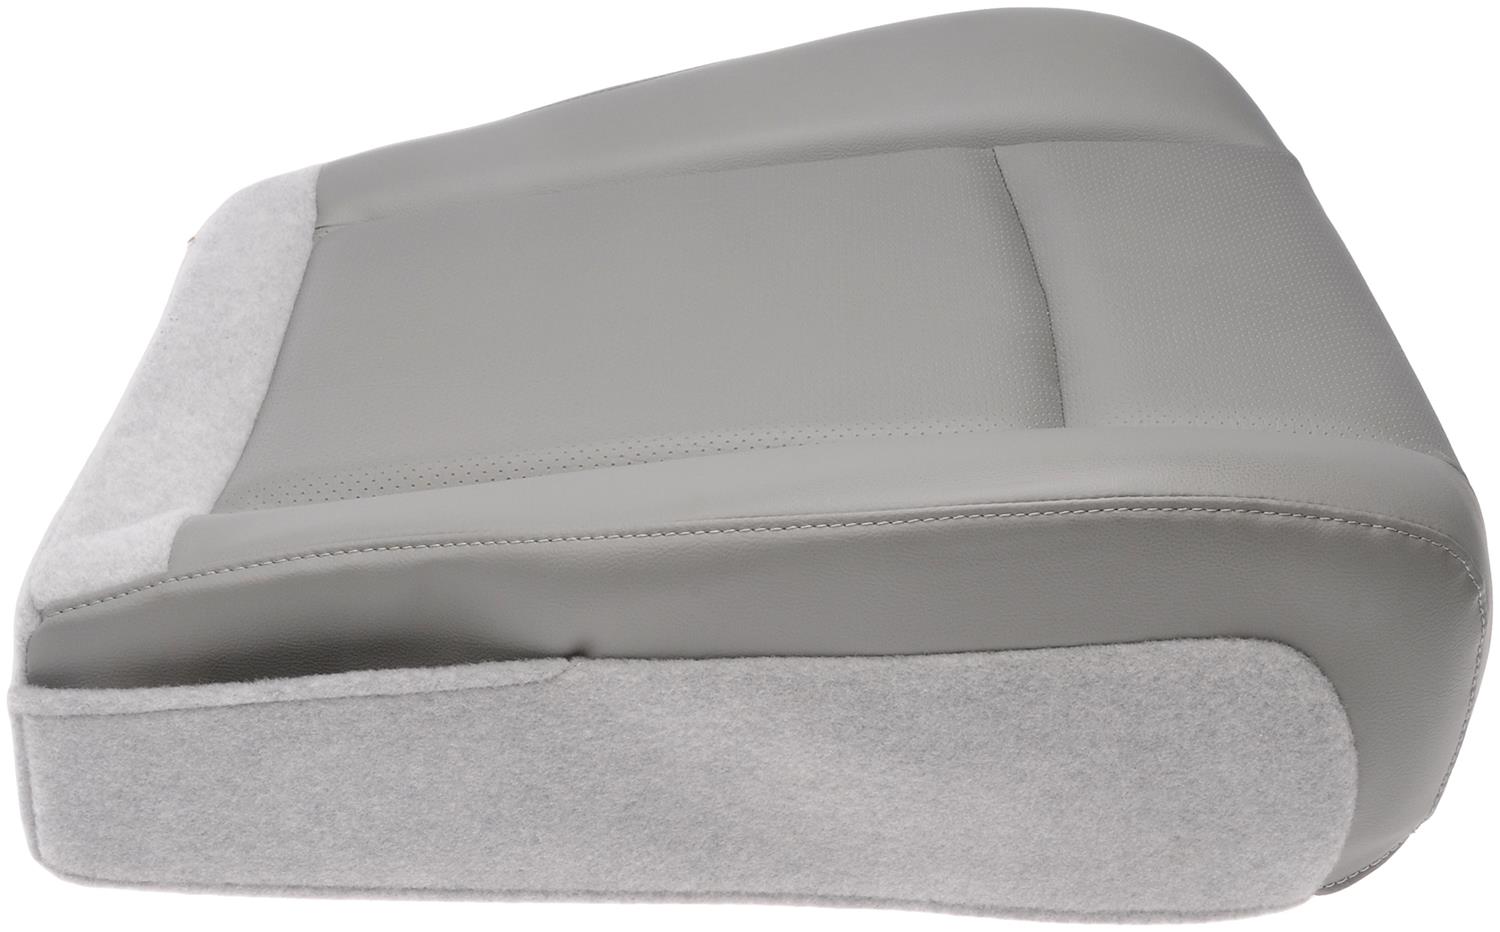 Summit Gifts IN-9738 Heated Seat Cushions